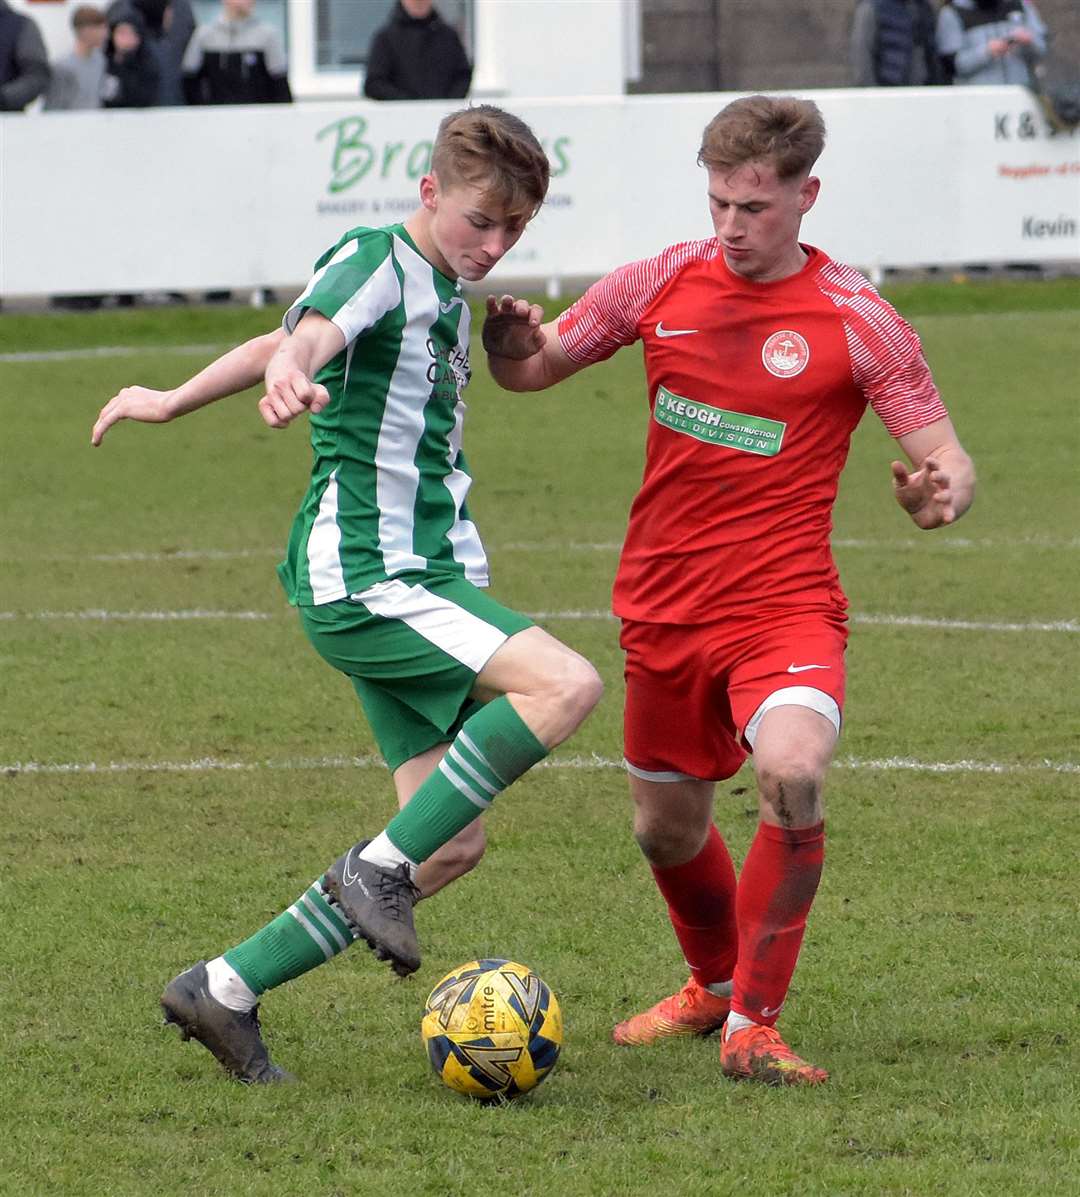 Hythe Town, 1-0 winners over Chichester, visit Ashford this weekend. Randolph File